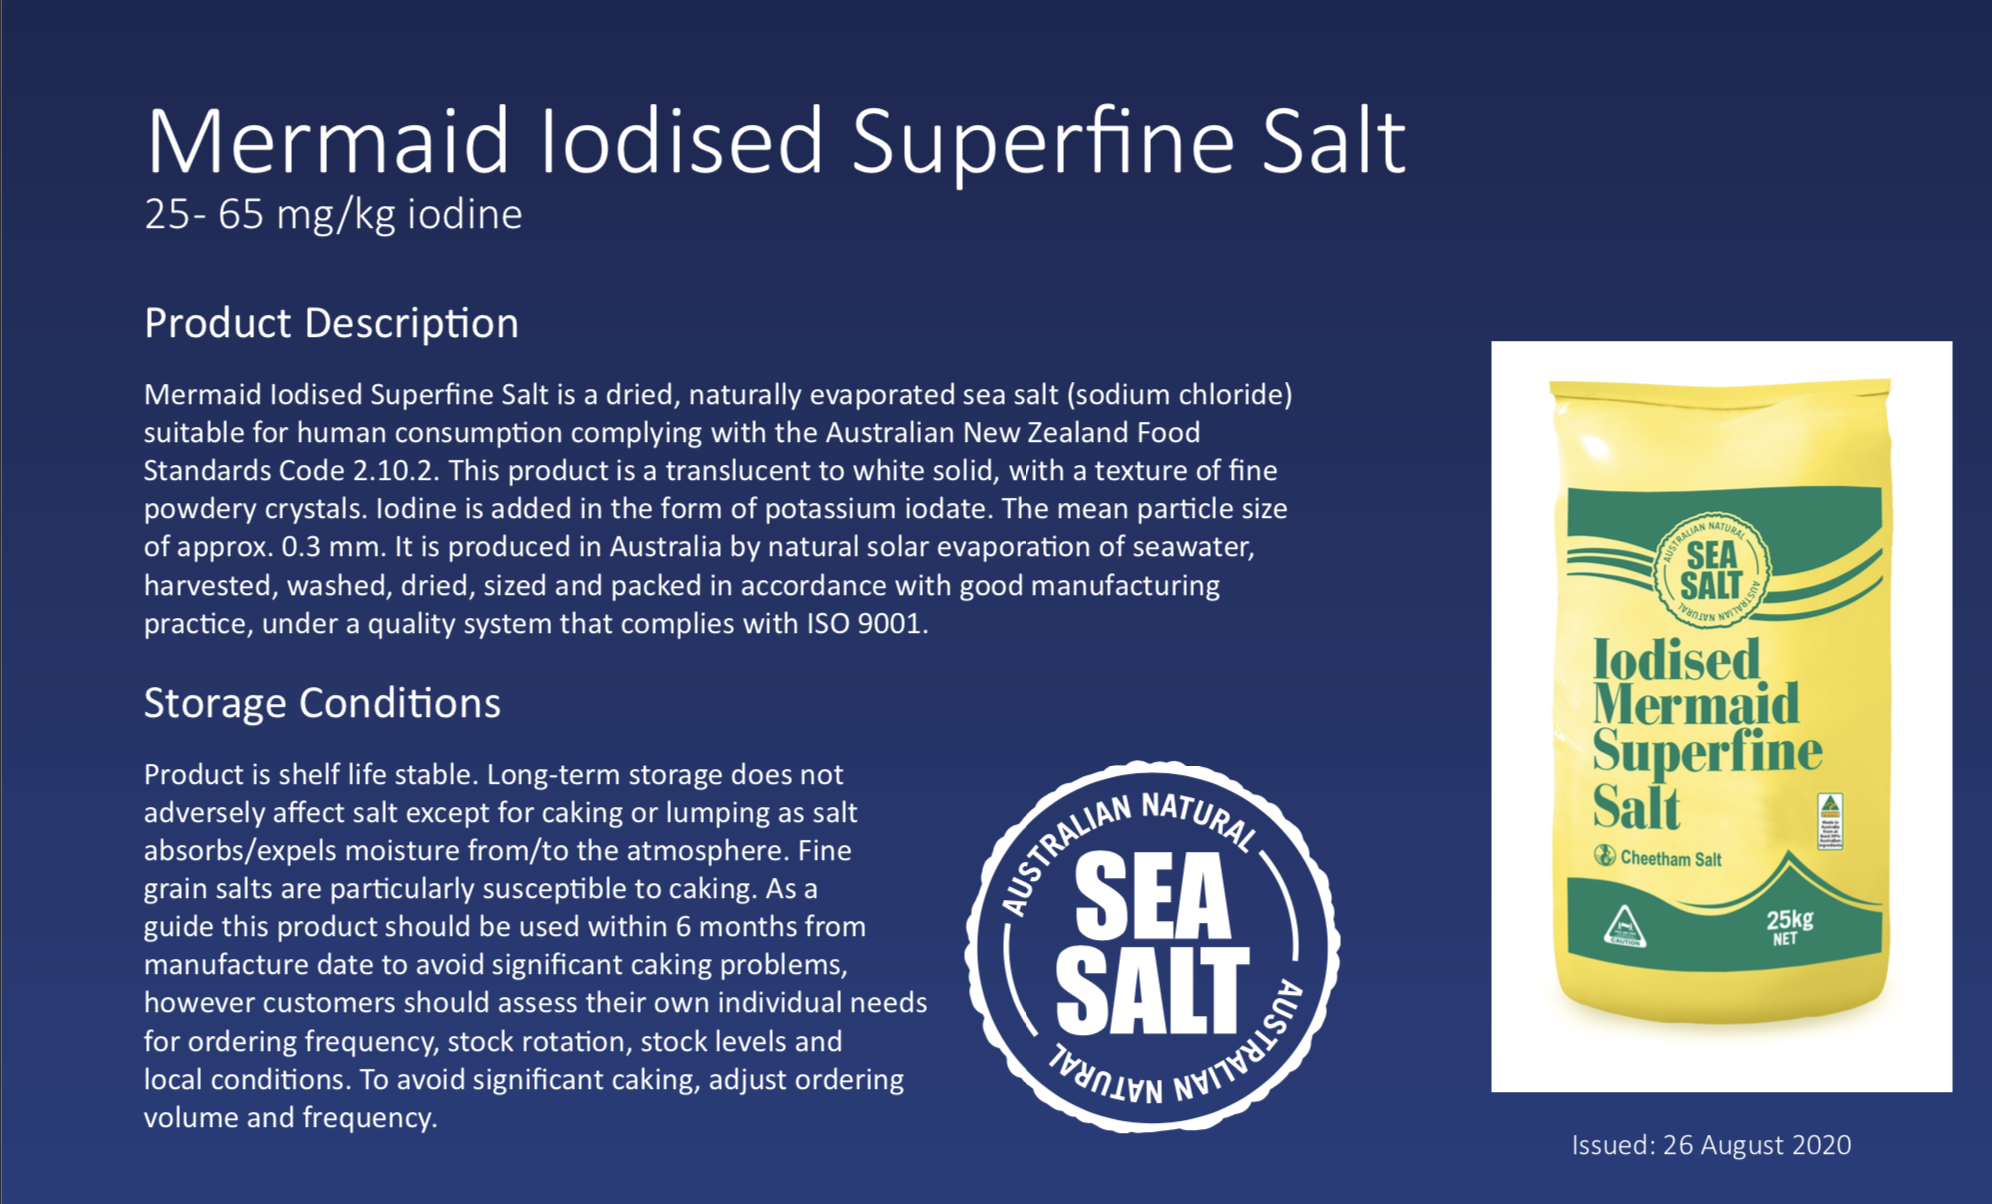 Mermaid Iodise Superfine Salt product description. The product description includes storage conditions and a seal stating 